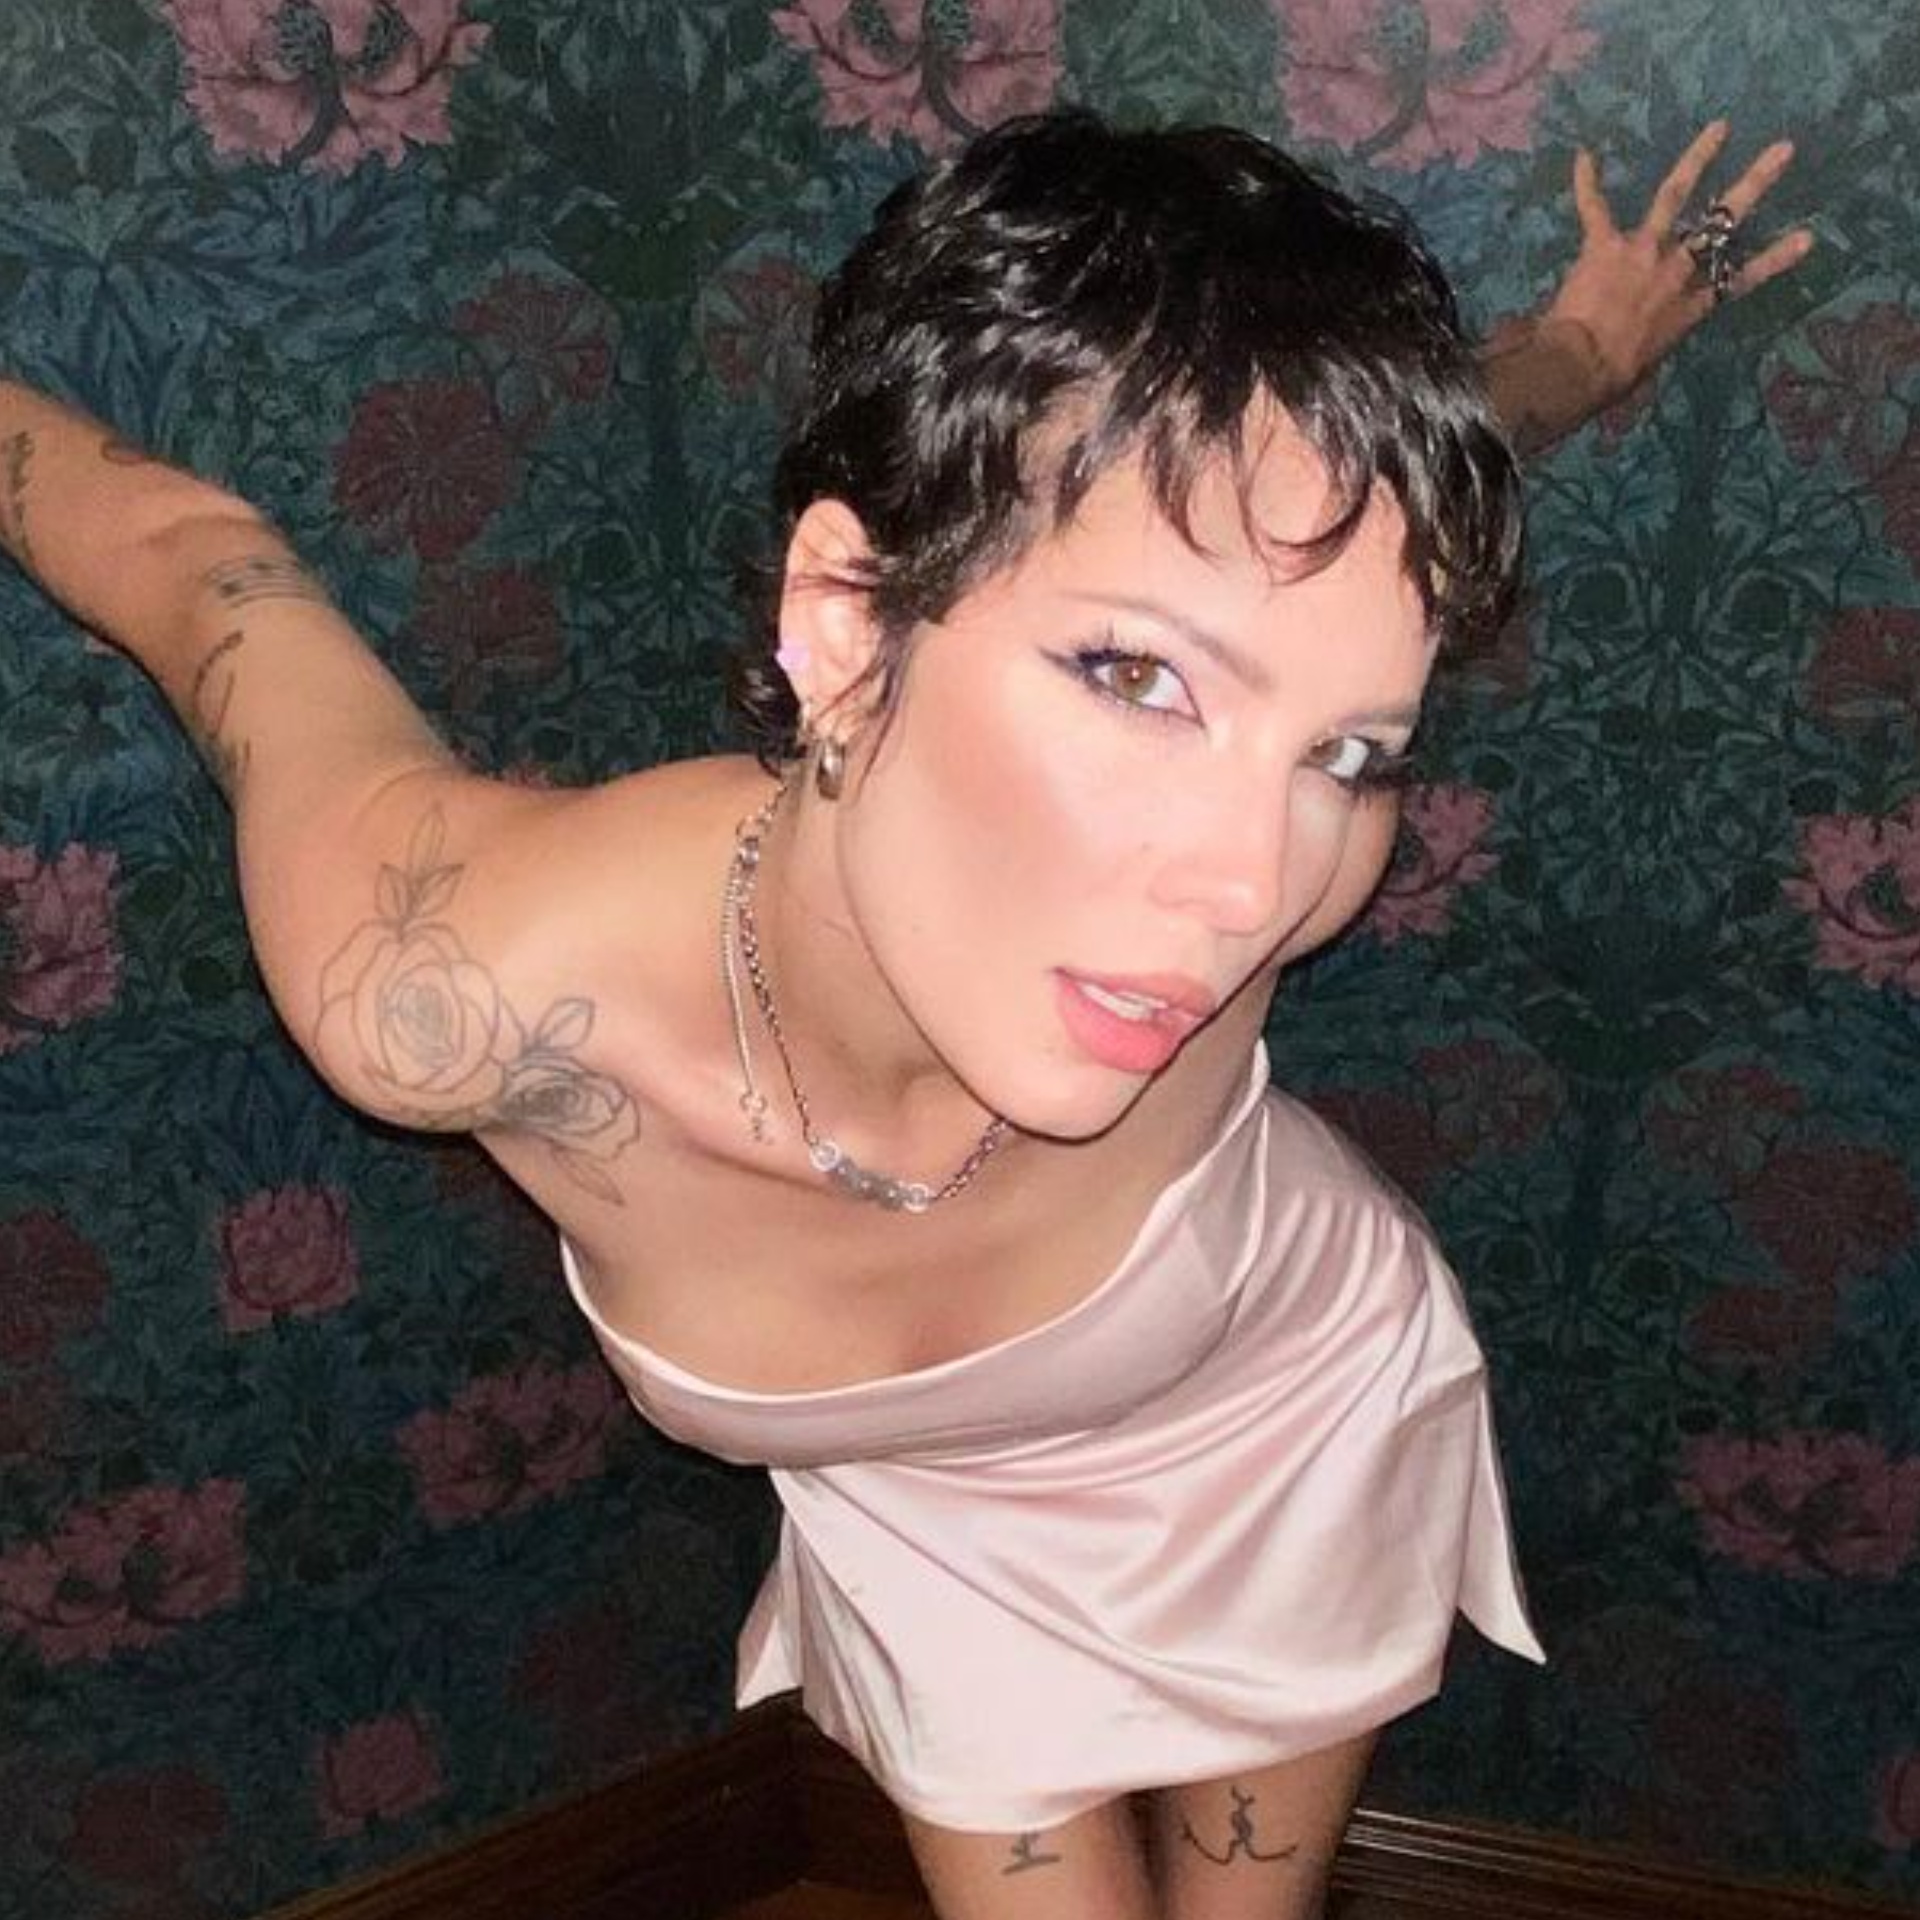 Celebrity Singer Halsey Goes Down Memory Lane, Delights Fans with Lively Photos to Mark Manic’s Anniversary